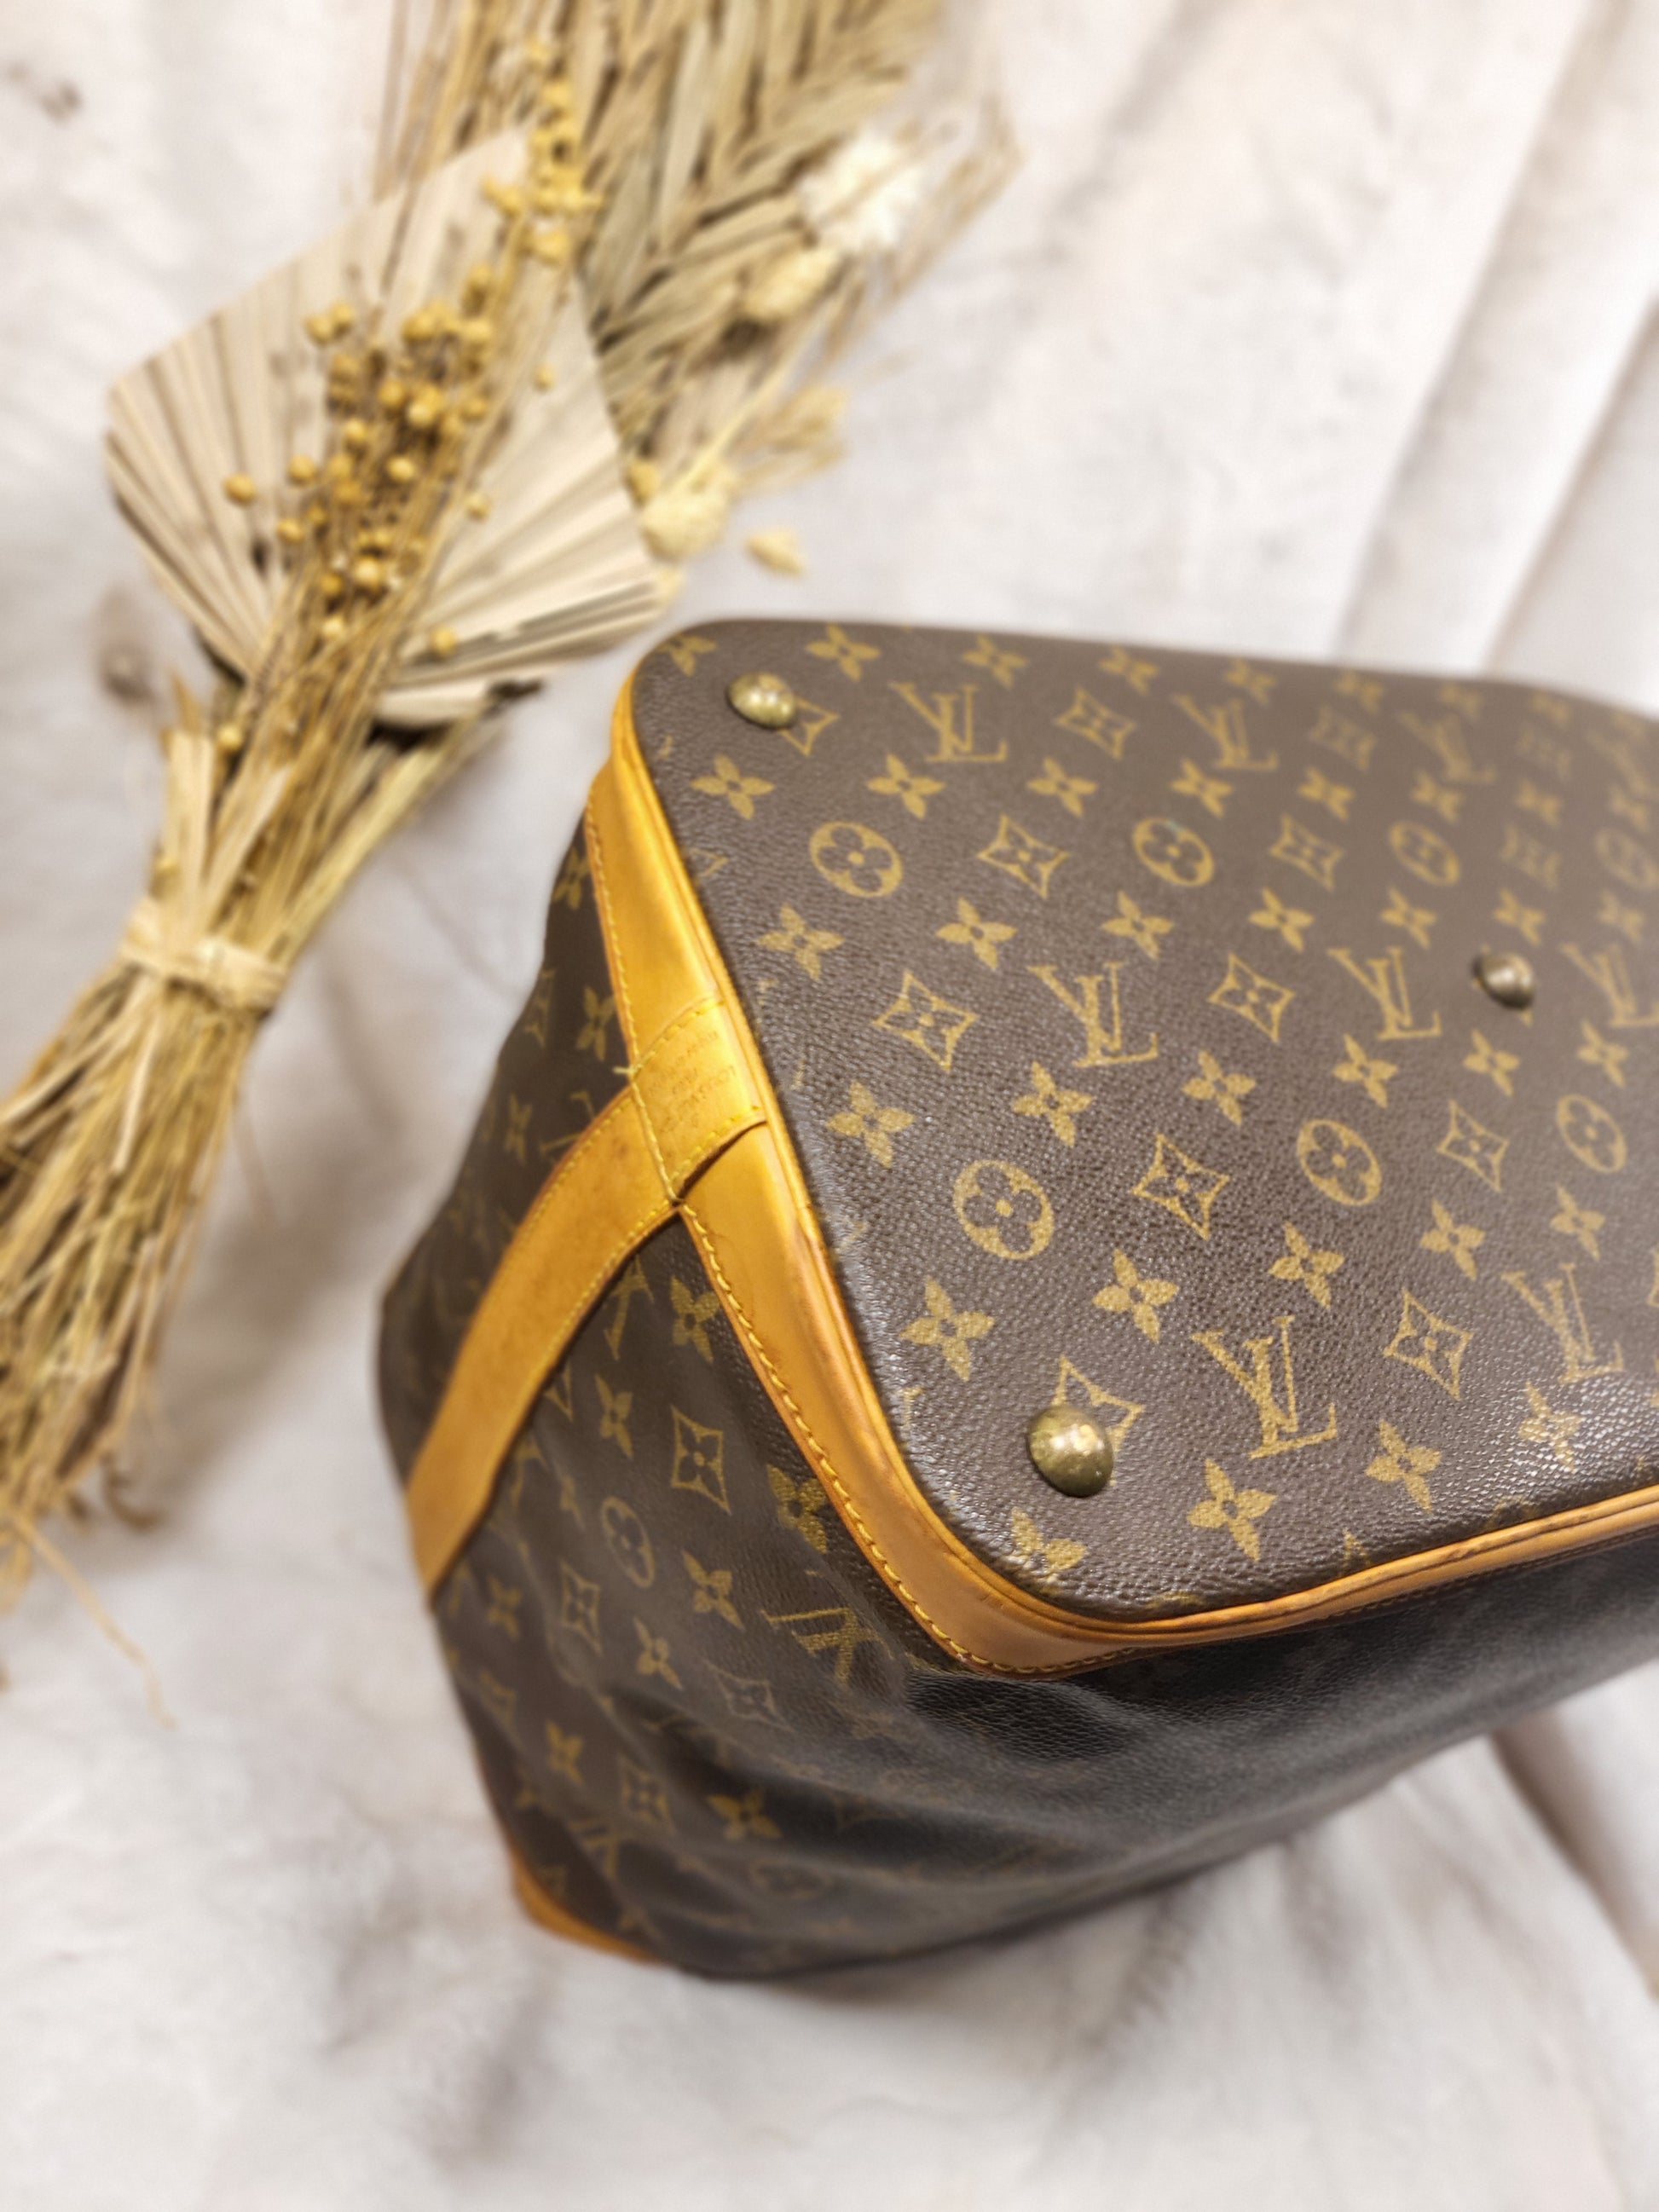 Authentic pre-owned Louis Vuitton Cruiser 40